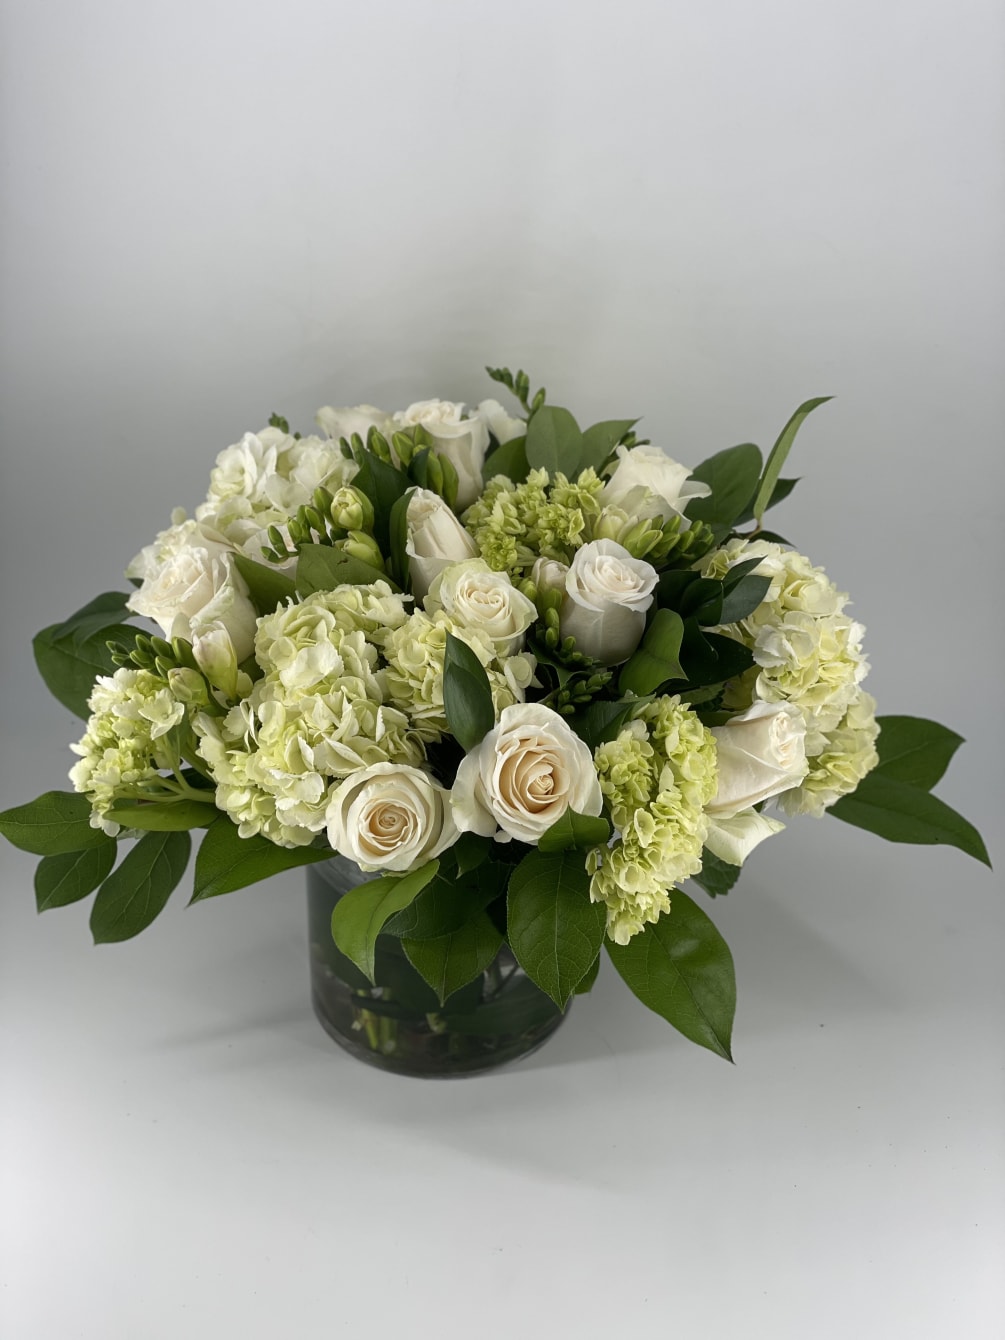 This timeless arrangement is filled with beautiful white blooms such Roses, Hydrangea